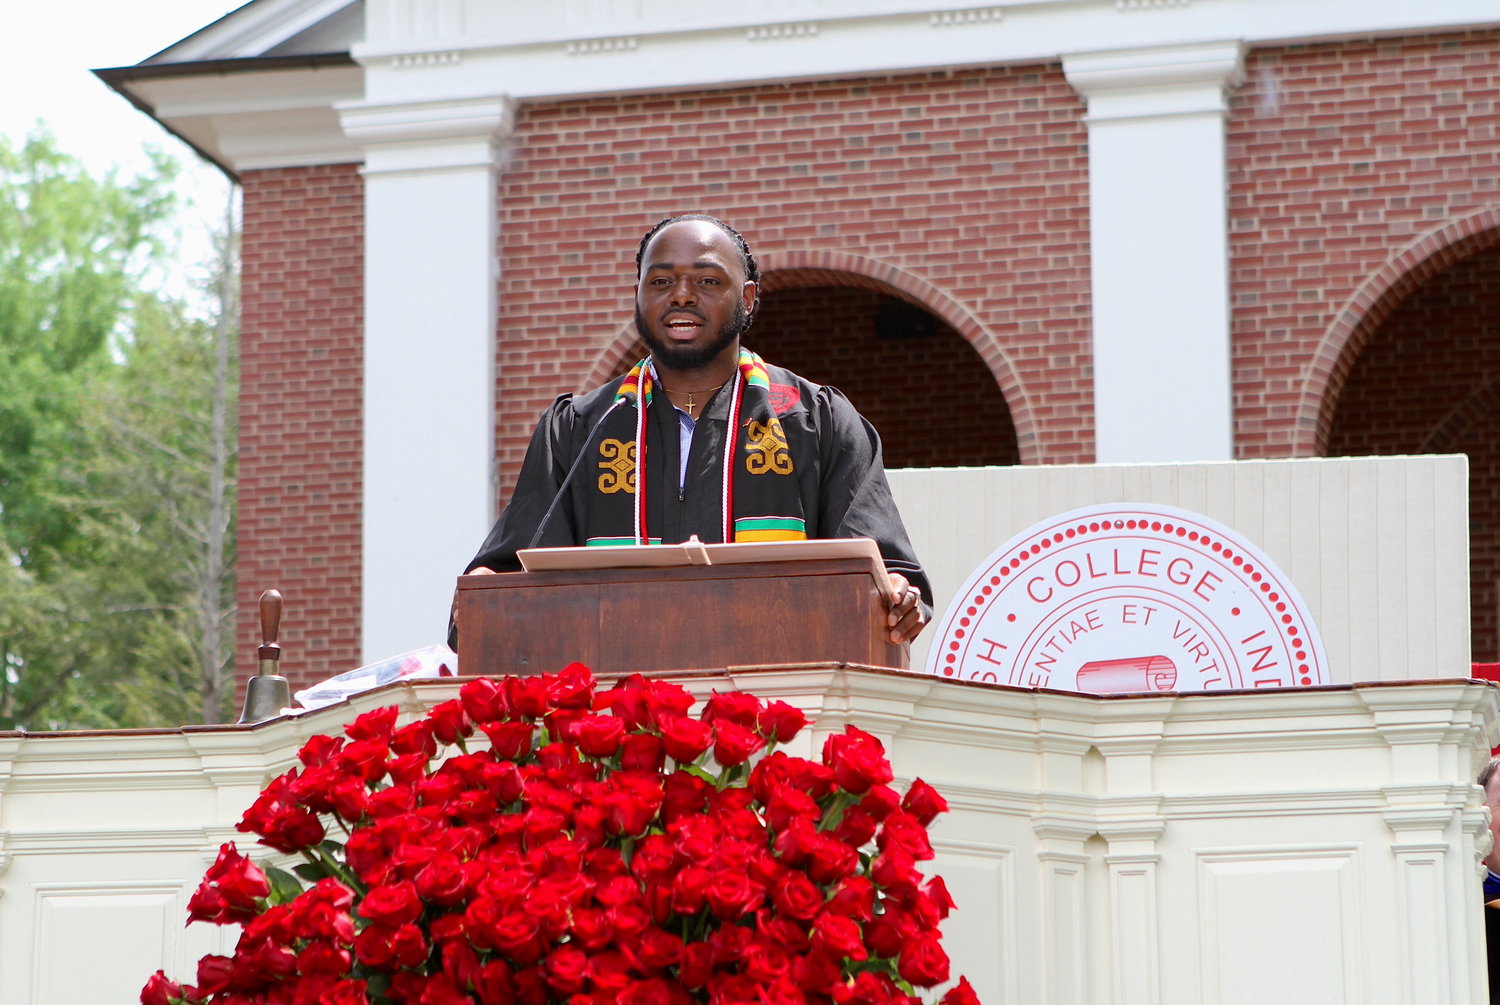 Kenny Coleman addresses his fellow classmates Saturday during commencement exercises at Wabash College.